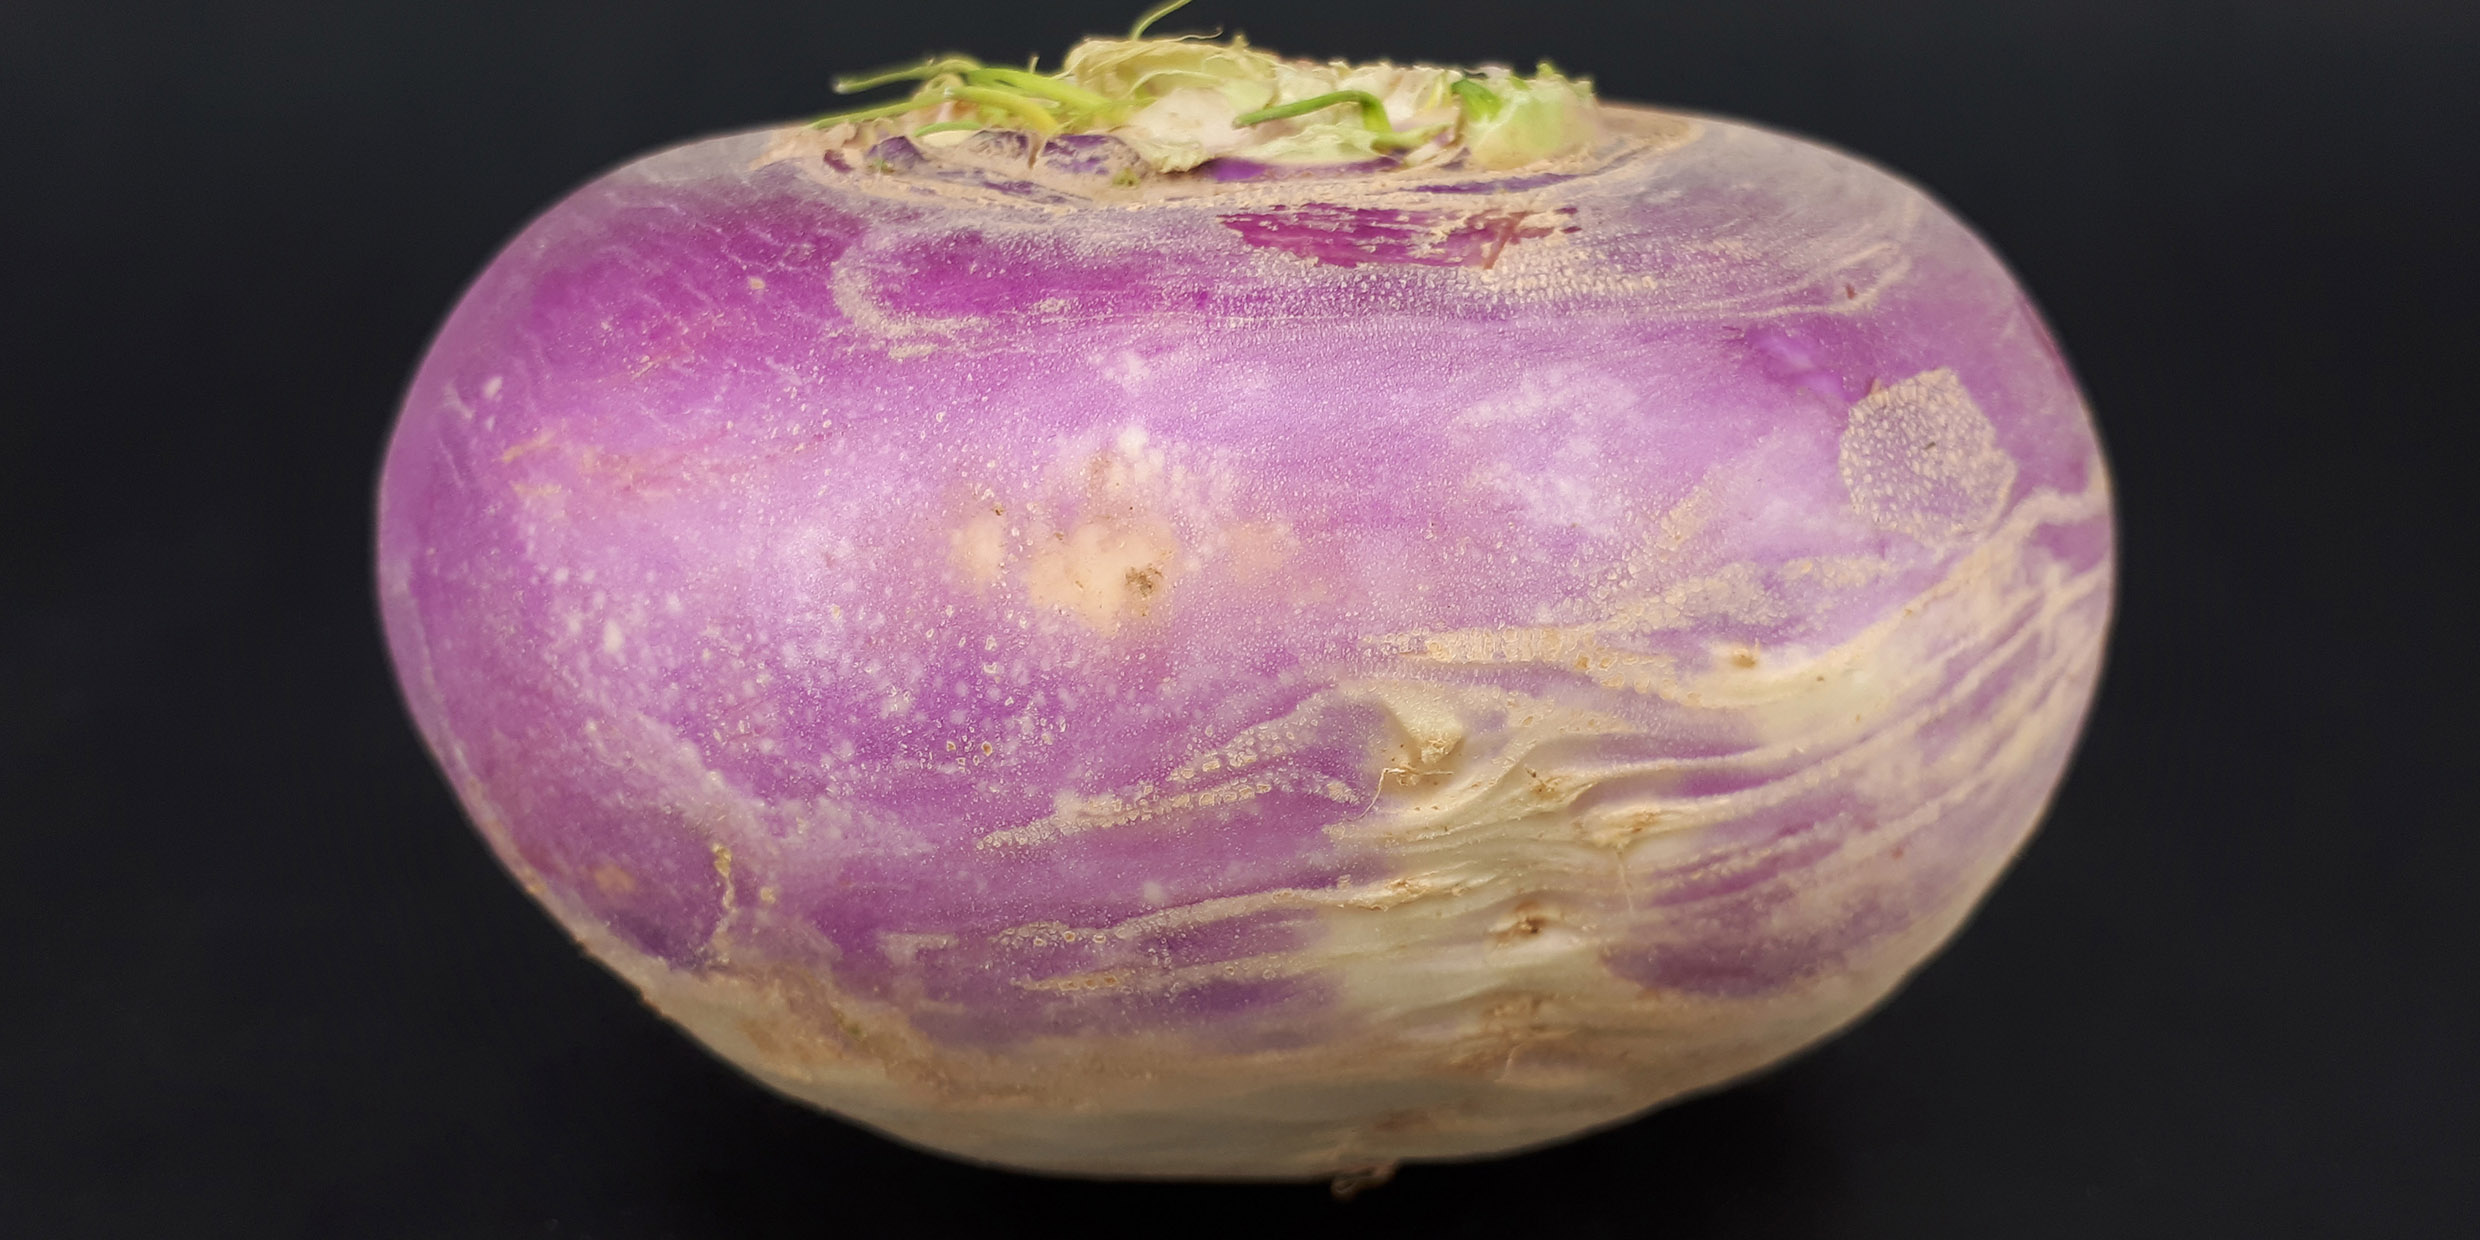 My very distant cousin, the turnip